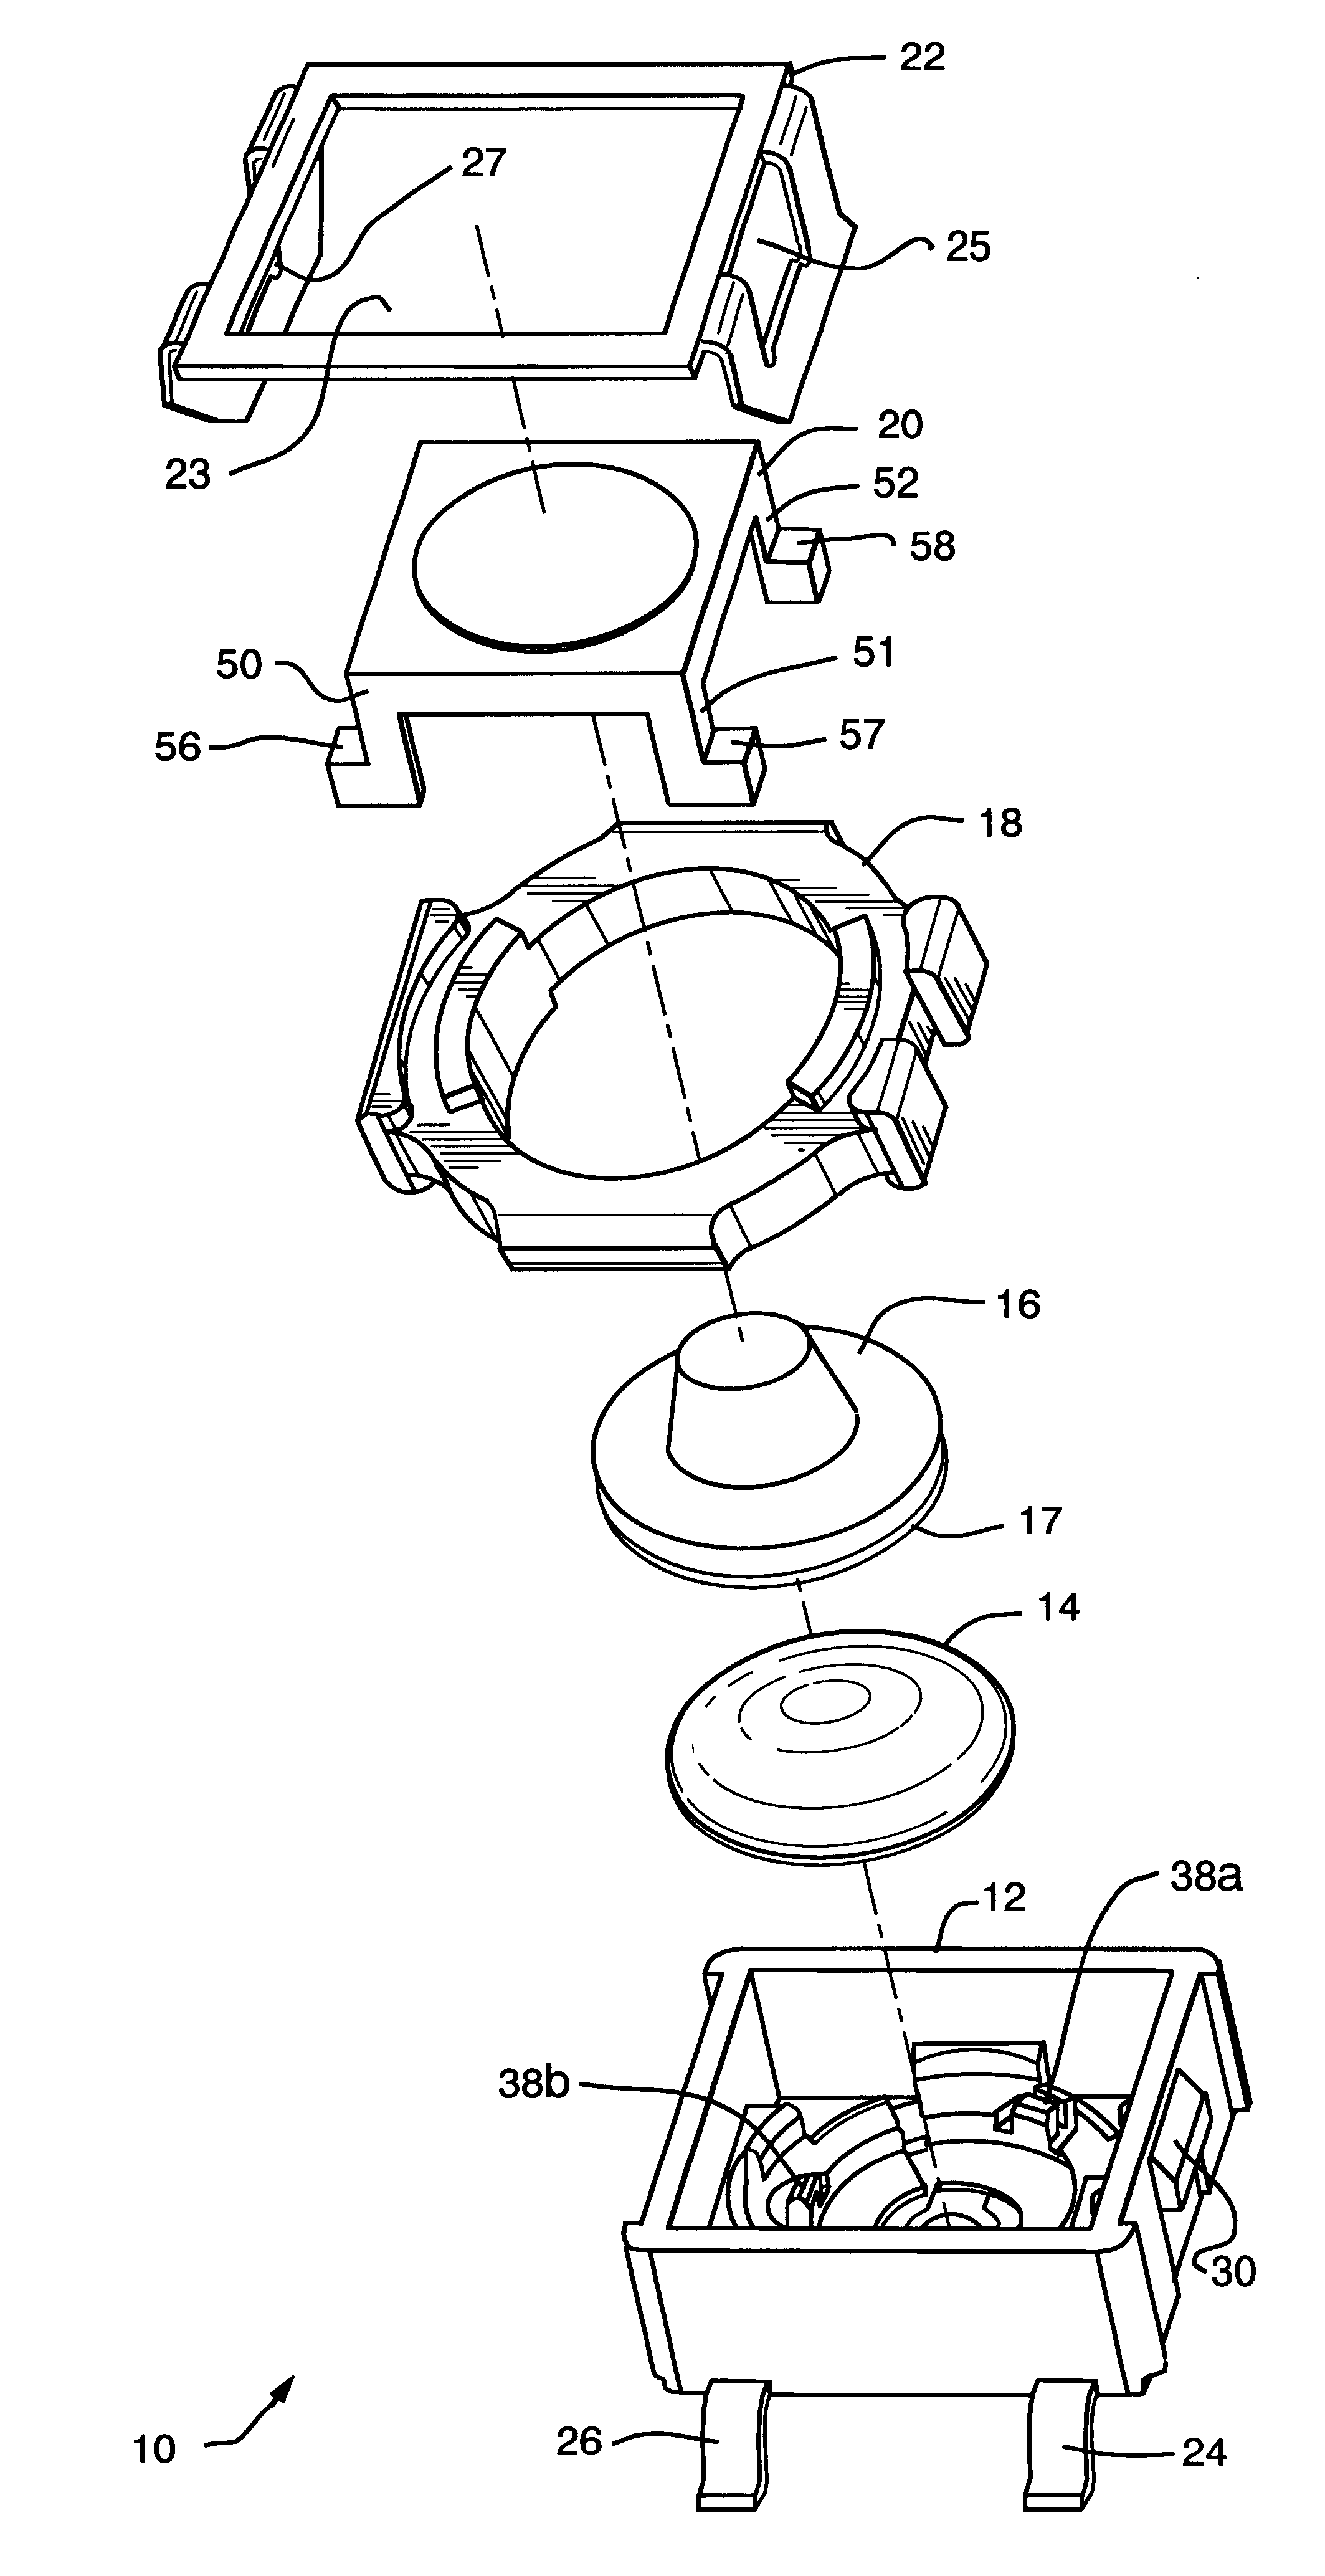 Normally open extended travel dual tact switch assembly with sequential actuation of individual switches